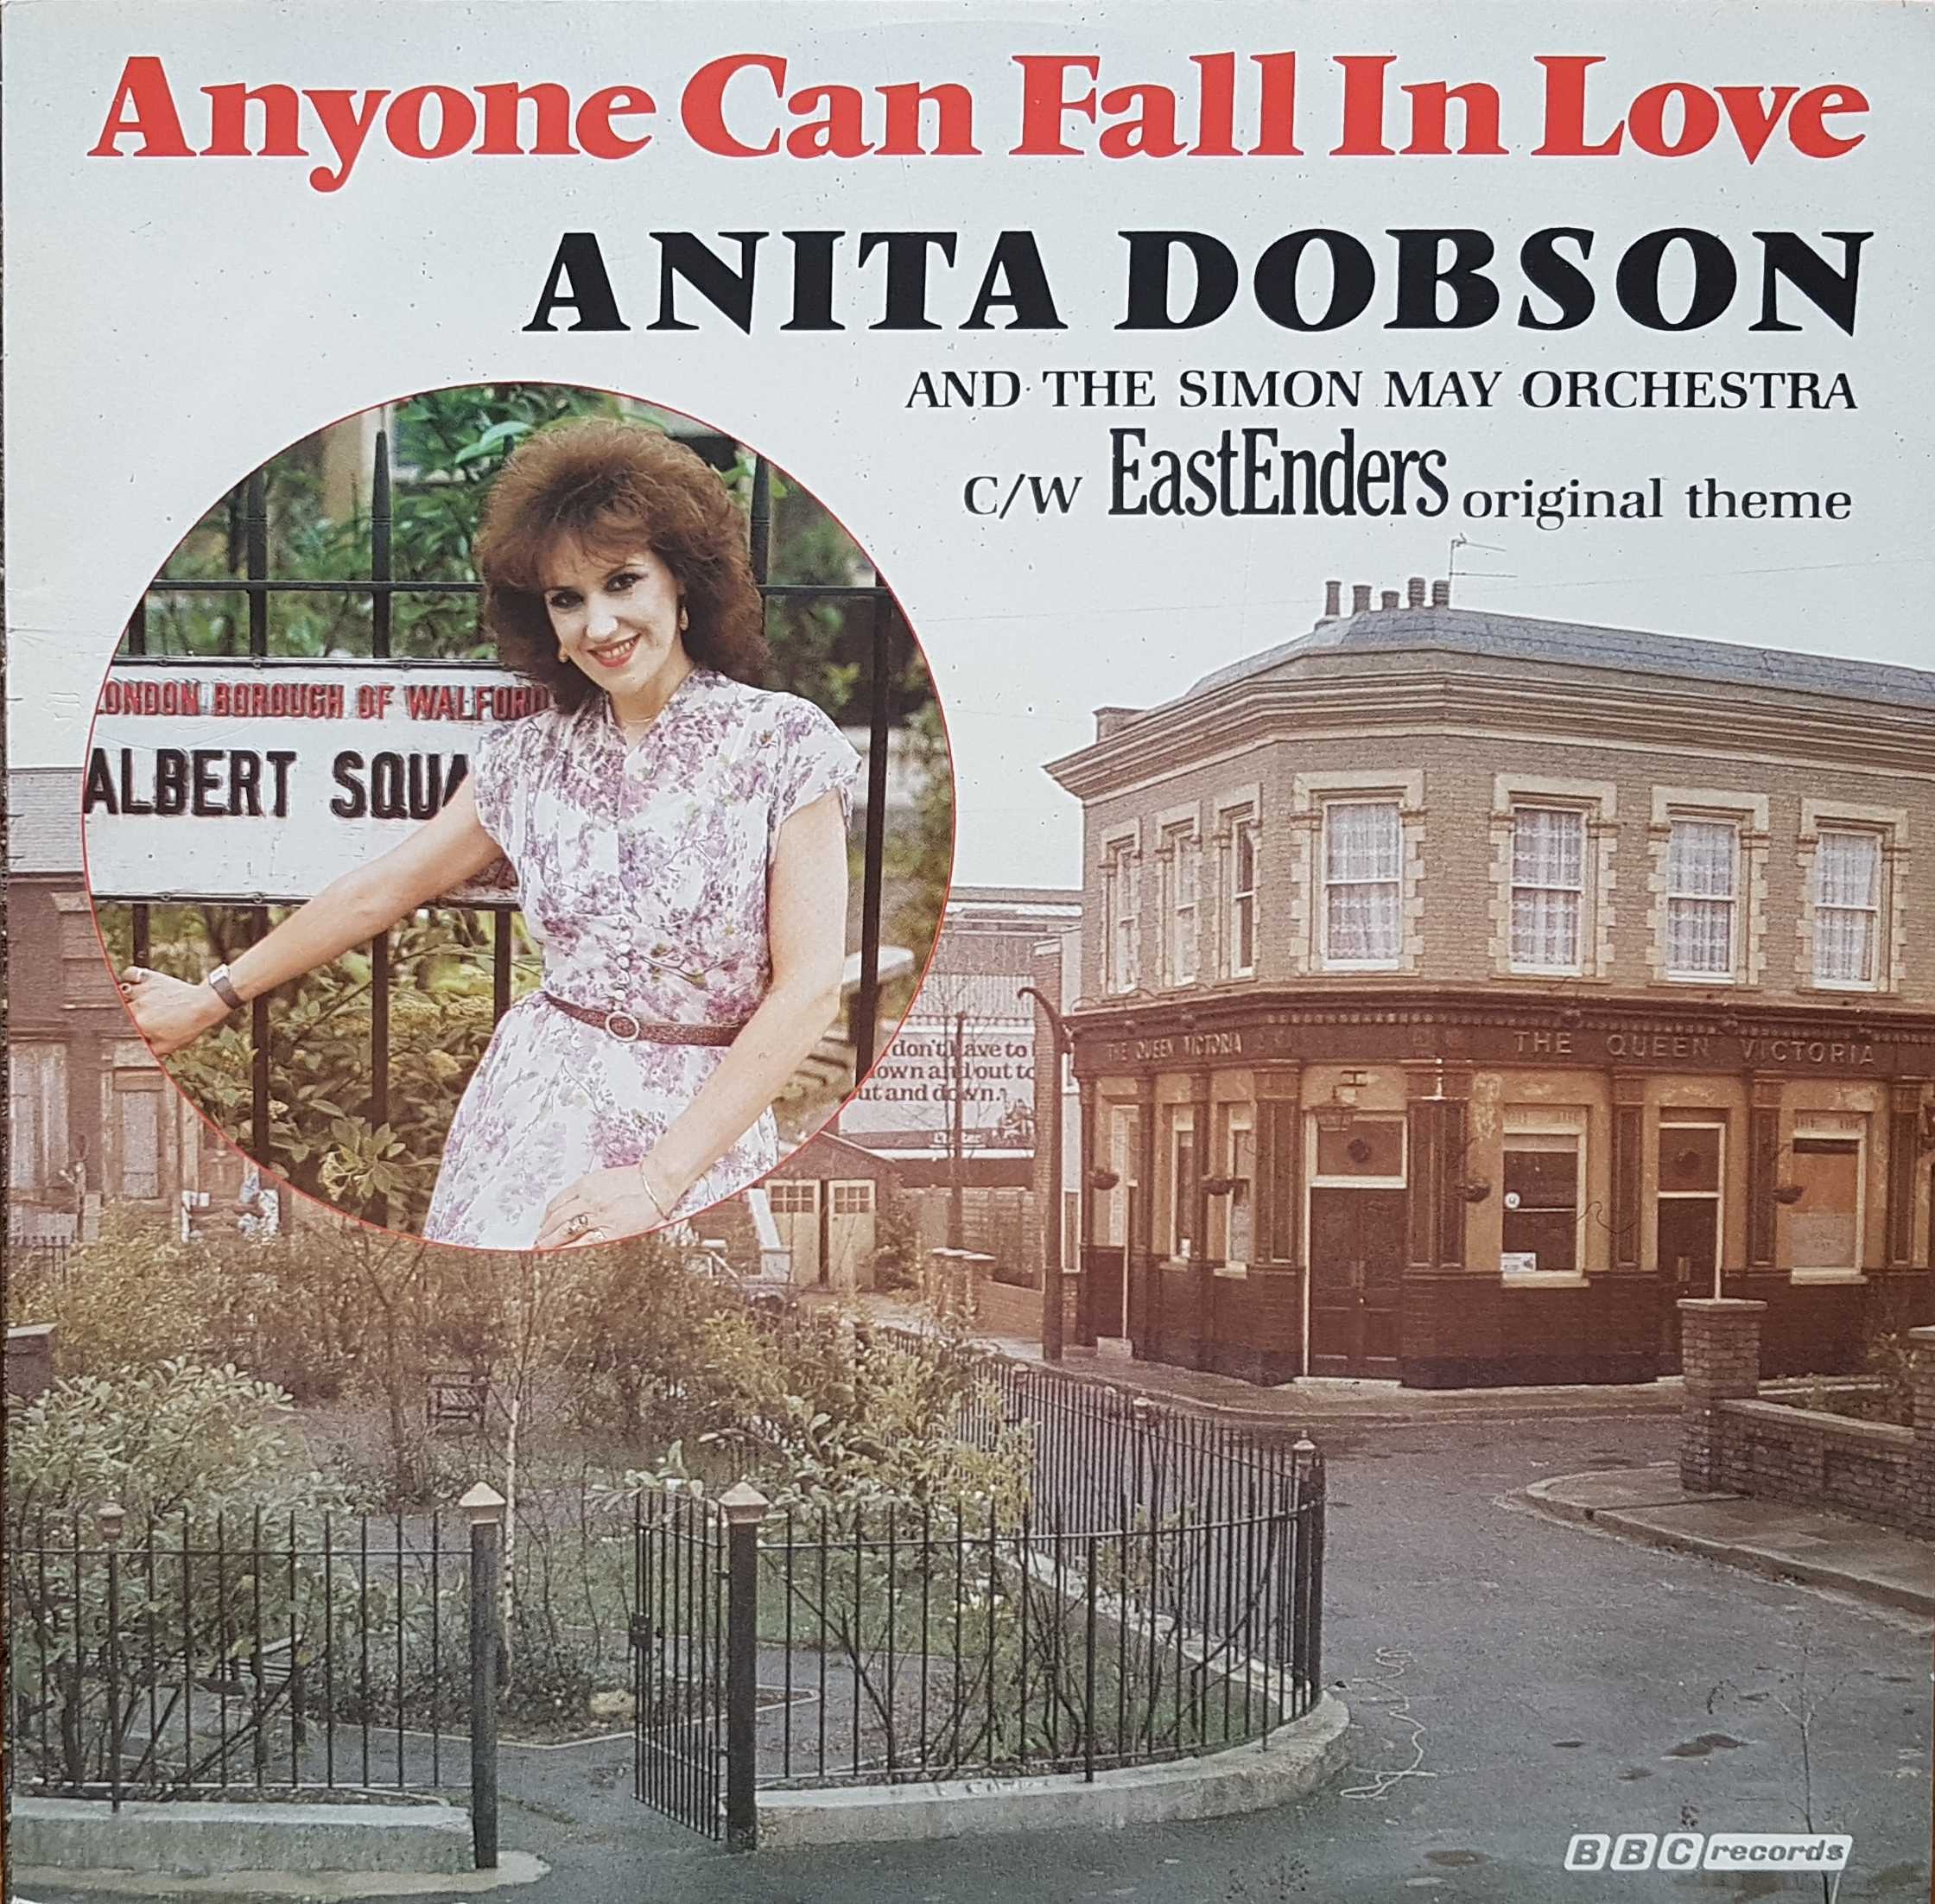 Picture of 12 RSL 191 Anyone can fall in love (EastEnders) by artist Simon May / Leslie Osborne / Don Black / Anita Dobson from the BBC records and Tapes library